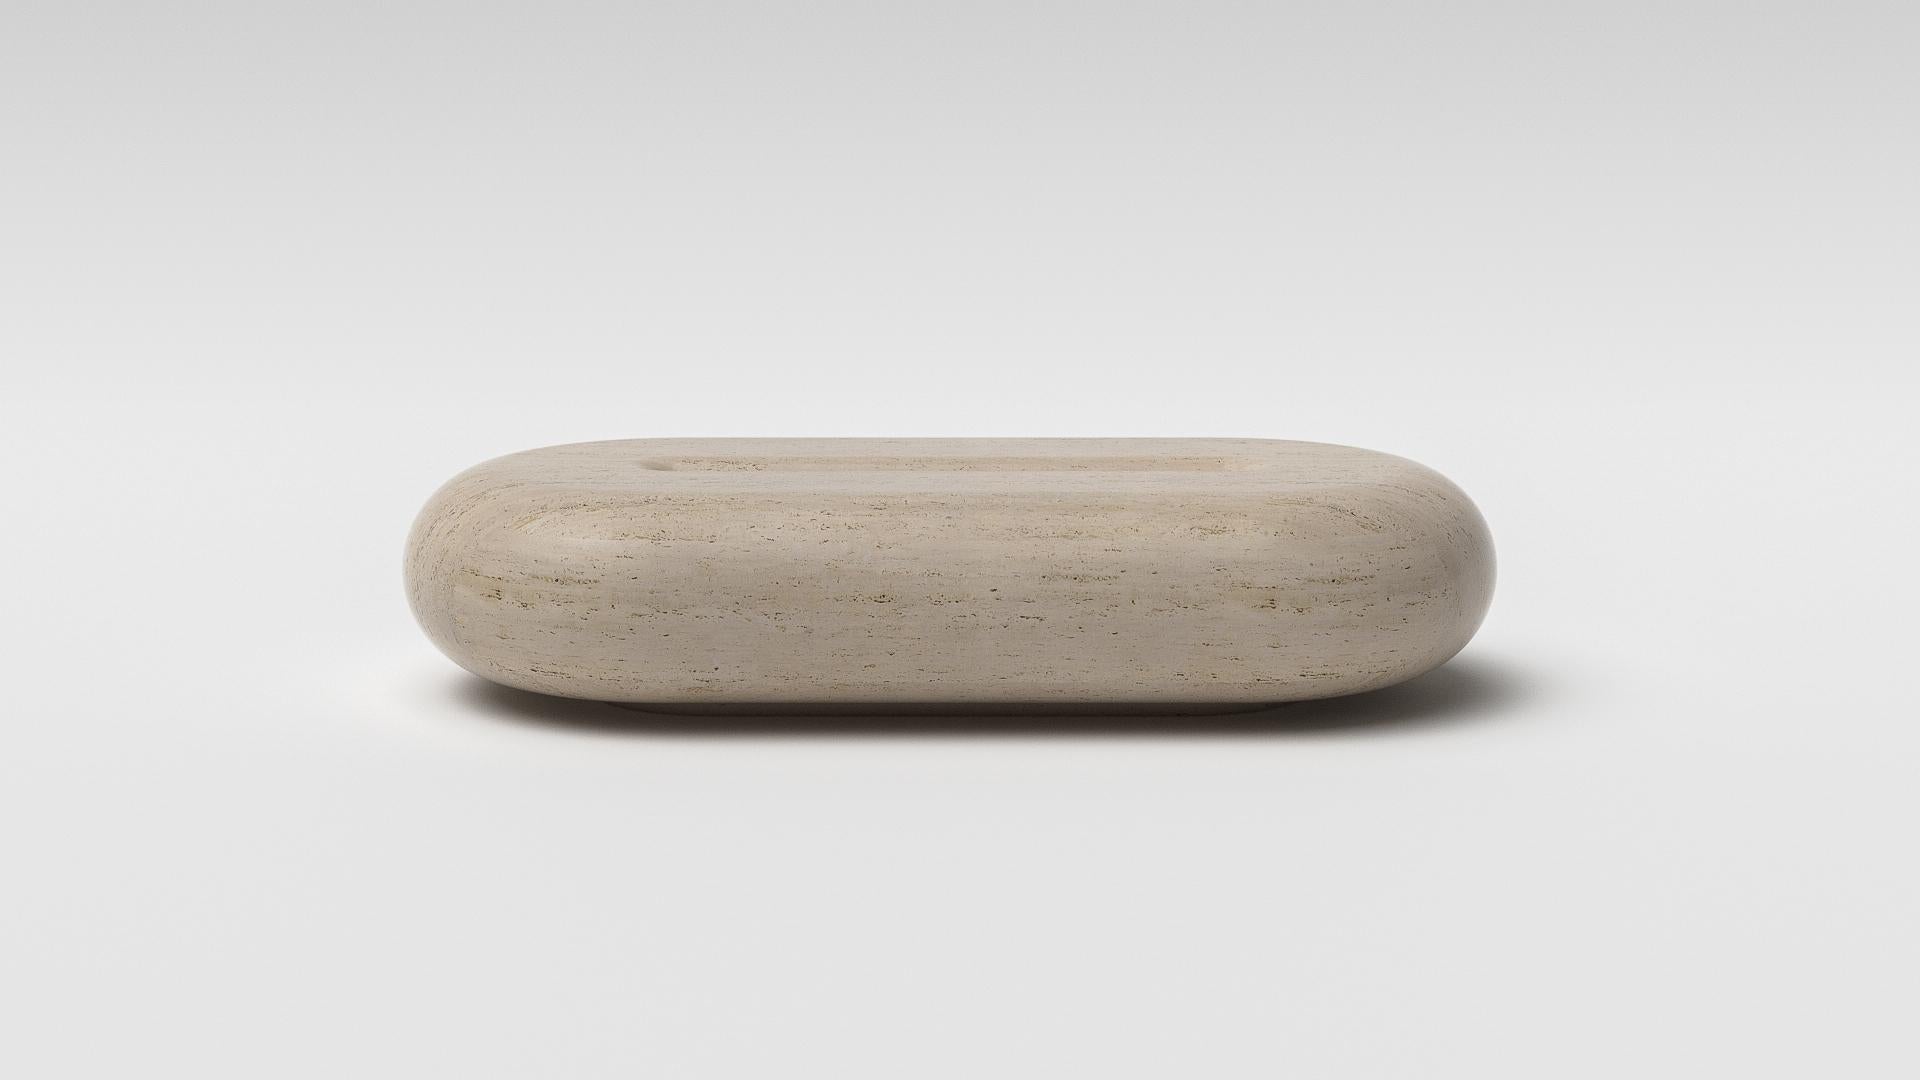 Glyph Travertine stone low table by Arthur Vallin
Numbered Edition
Dimensions: W120 x D60 x H31 cm
Materials: Travertine Stone
Finishing: Un-honed

French Artist, Designer, and Creative Director Arthur Vallin hold a master’s degree in Art